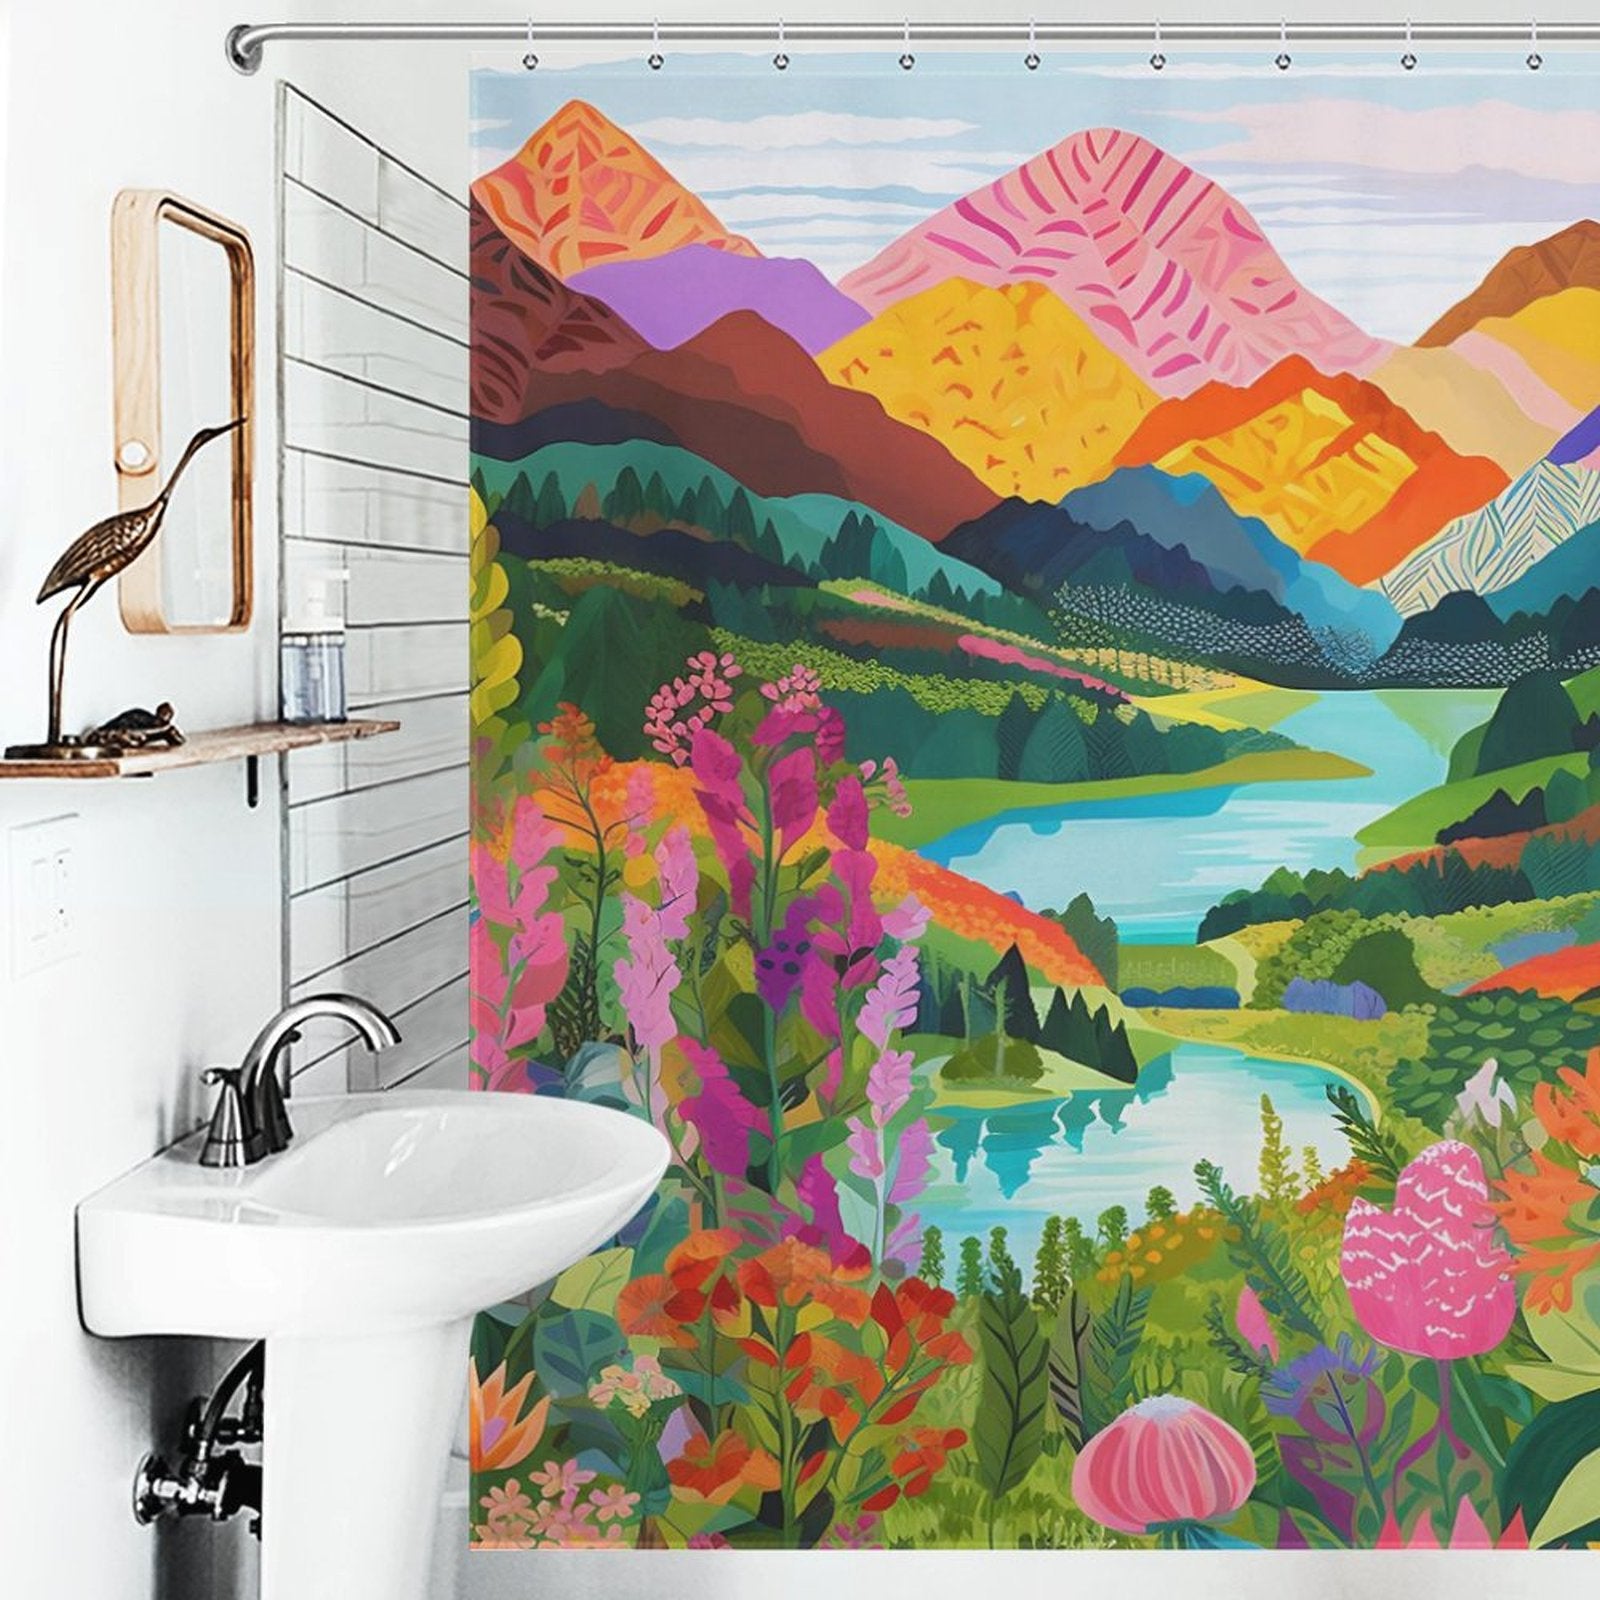 A **Cotton Cat Nature Forest Lake Watercolor Art Painting Landscape Colorful Green Mountain Abstract Shower Curtain-Cottoncat** hangs in a white bathroom with a sink and soap dispenser.